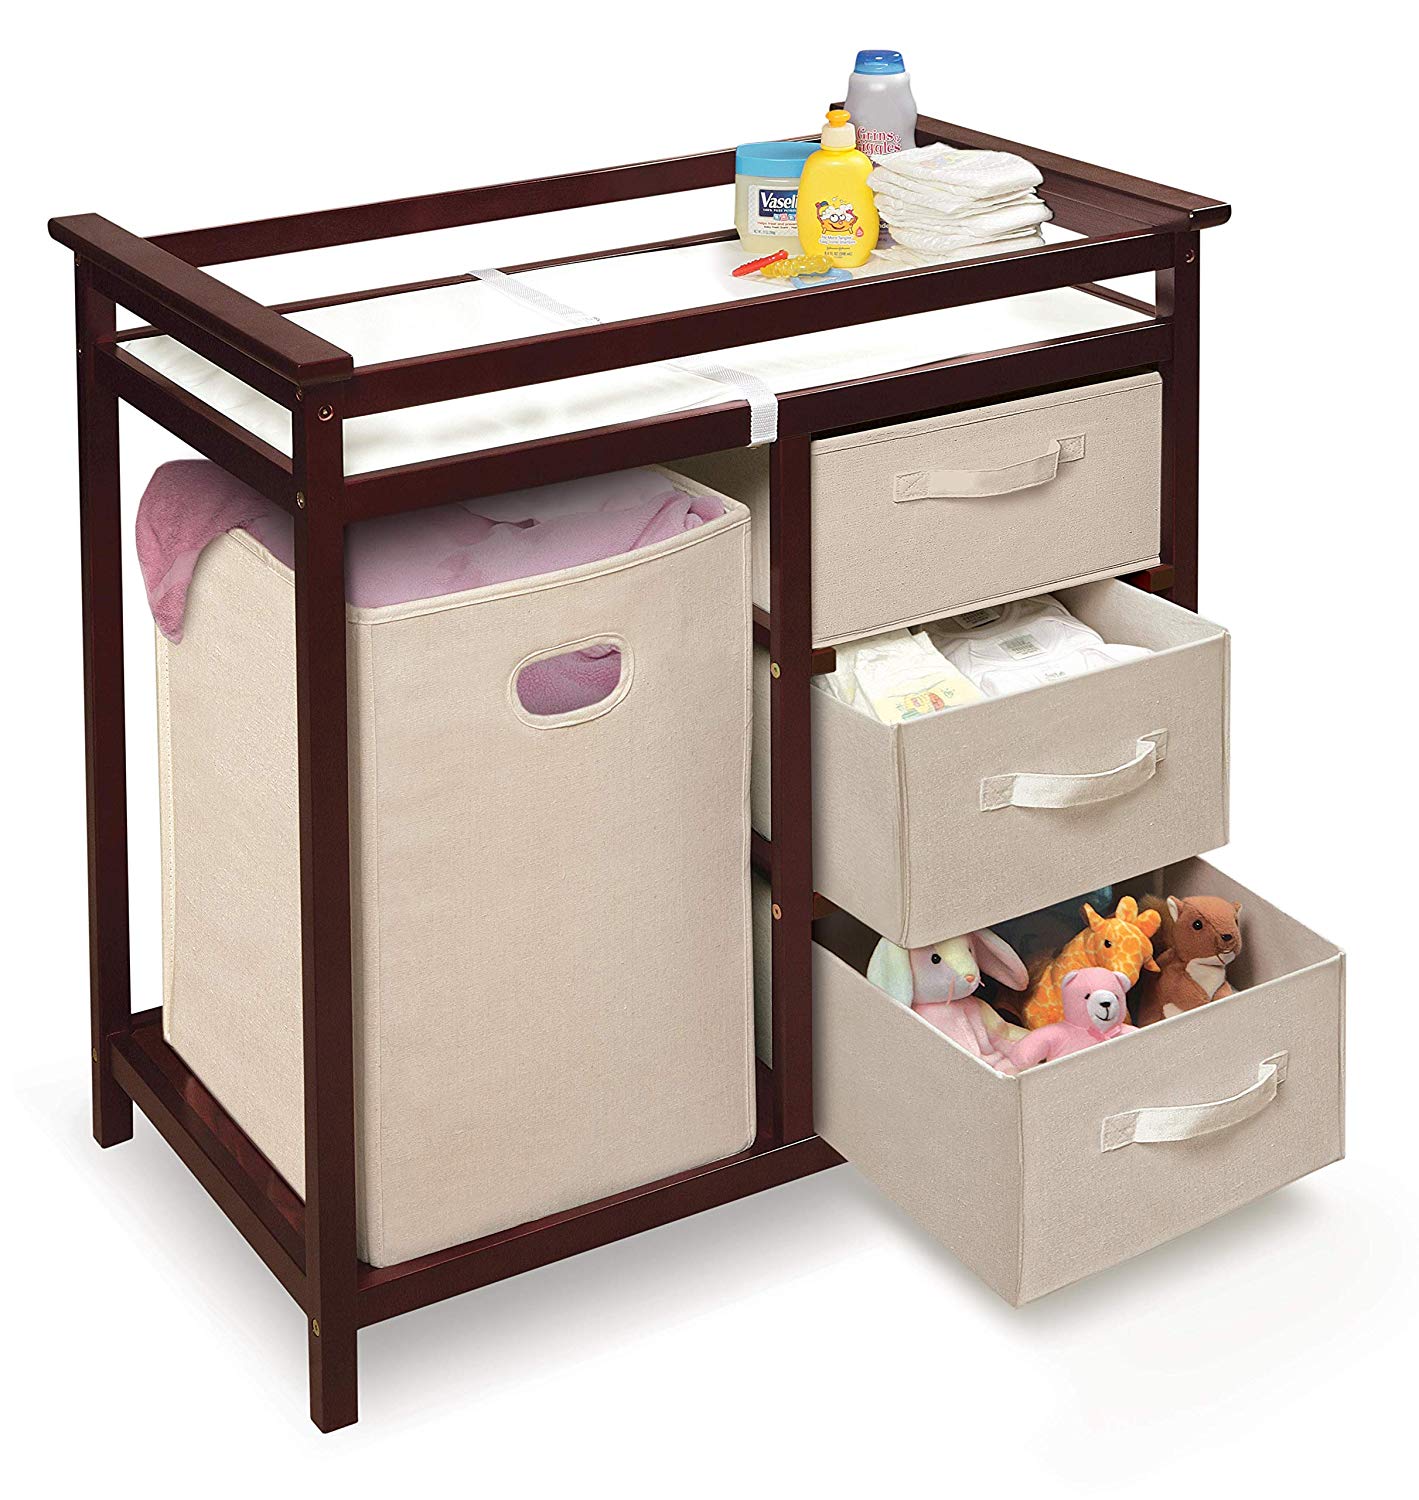 Badger Basket Modern Changing Table with Three Baskets & Hamper-Finish:Cherry - image 3 of 7